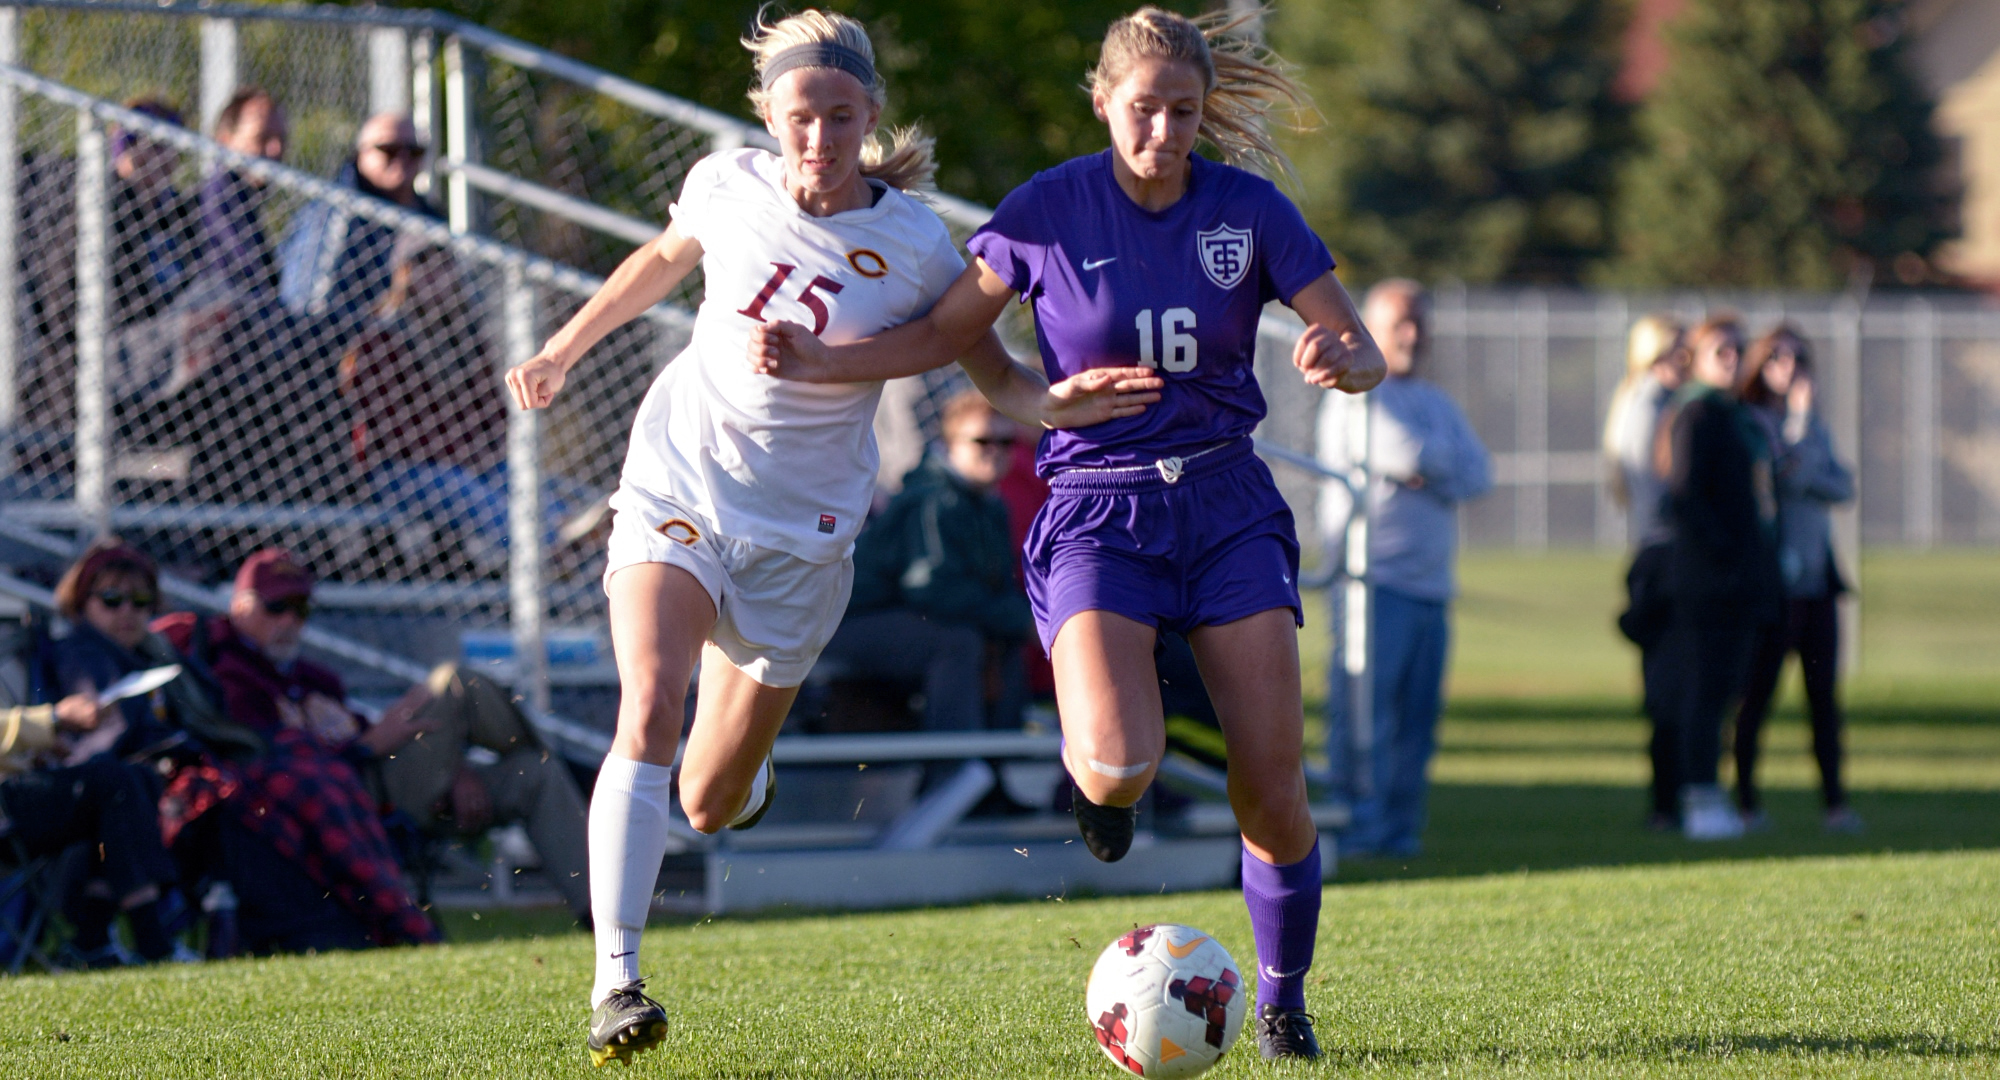 Senior Emily Payne battles for the ball on the right wing during the Cobbers' game with #14 St. Thomas. Payne scored her second goal in the last three games in the 2-1 loss.